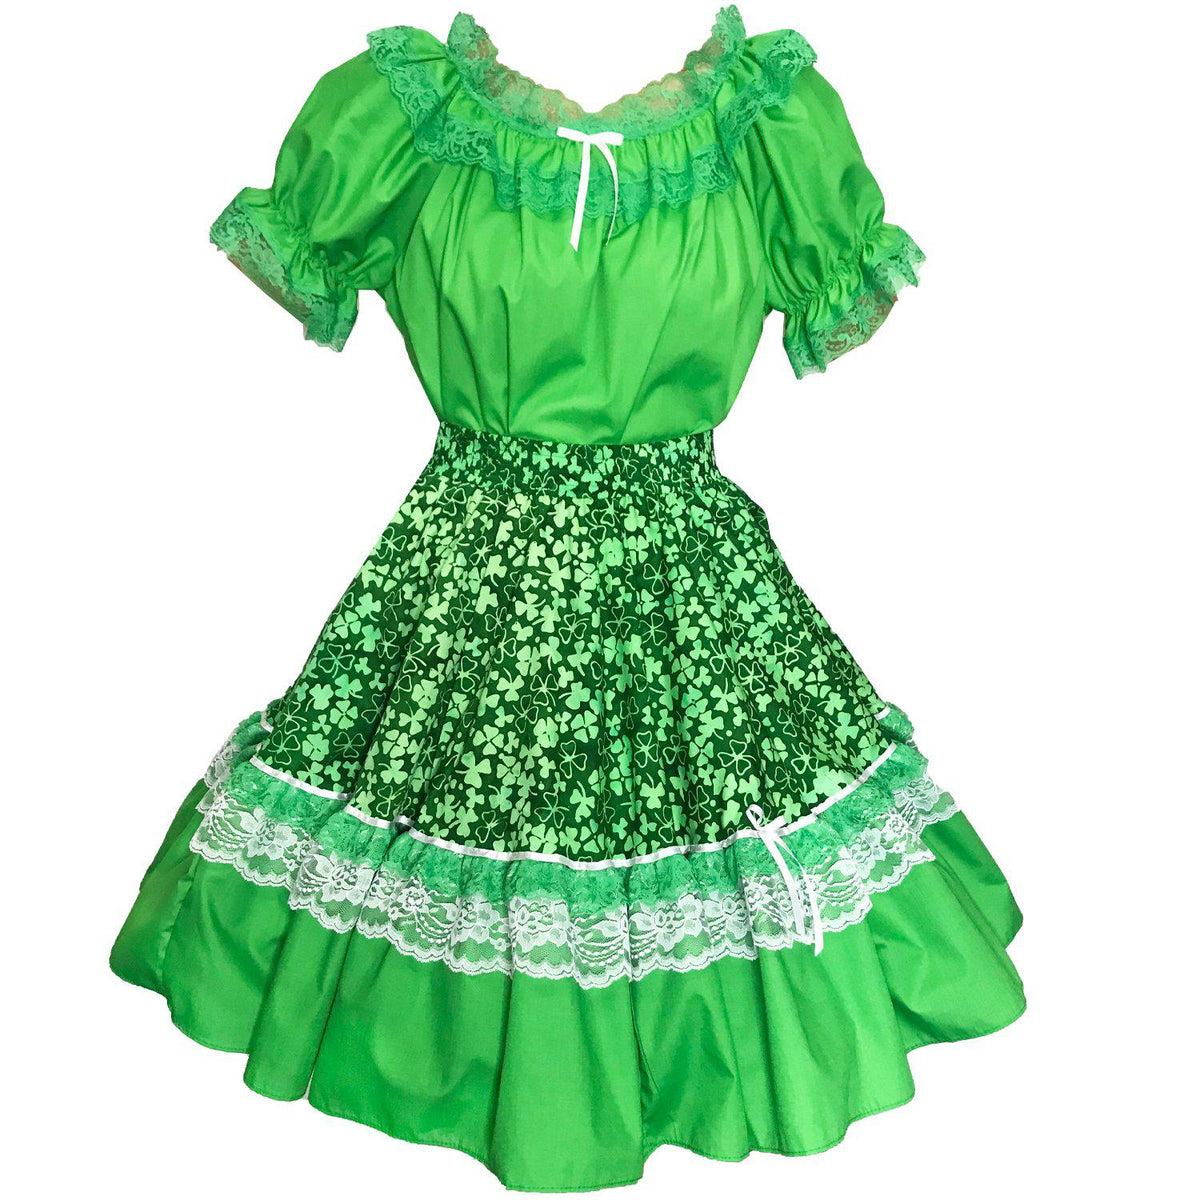 A Luck of the Irish Square Dance Outfit with a circle skirt and shamrock fabric by Square Up Fashions.